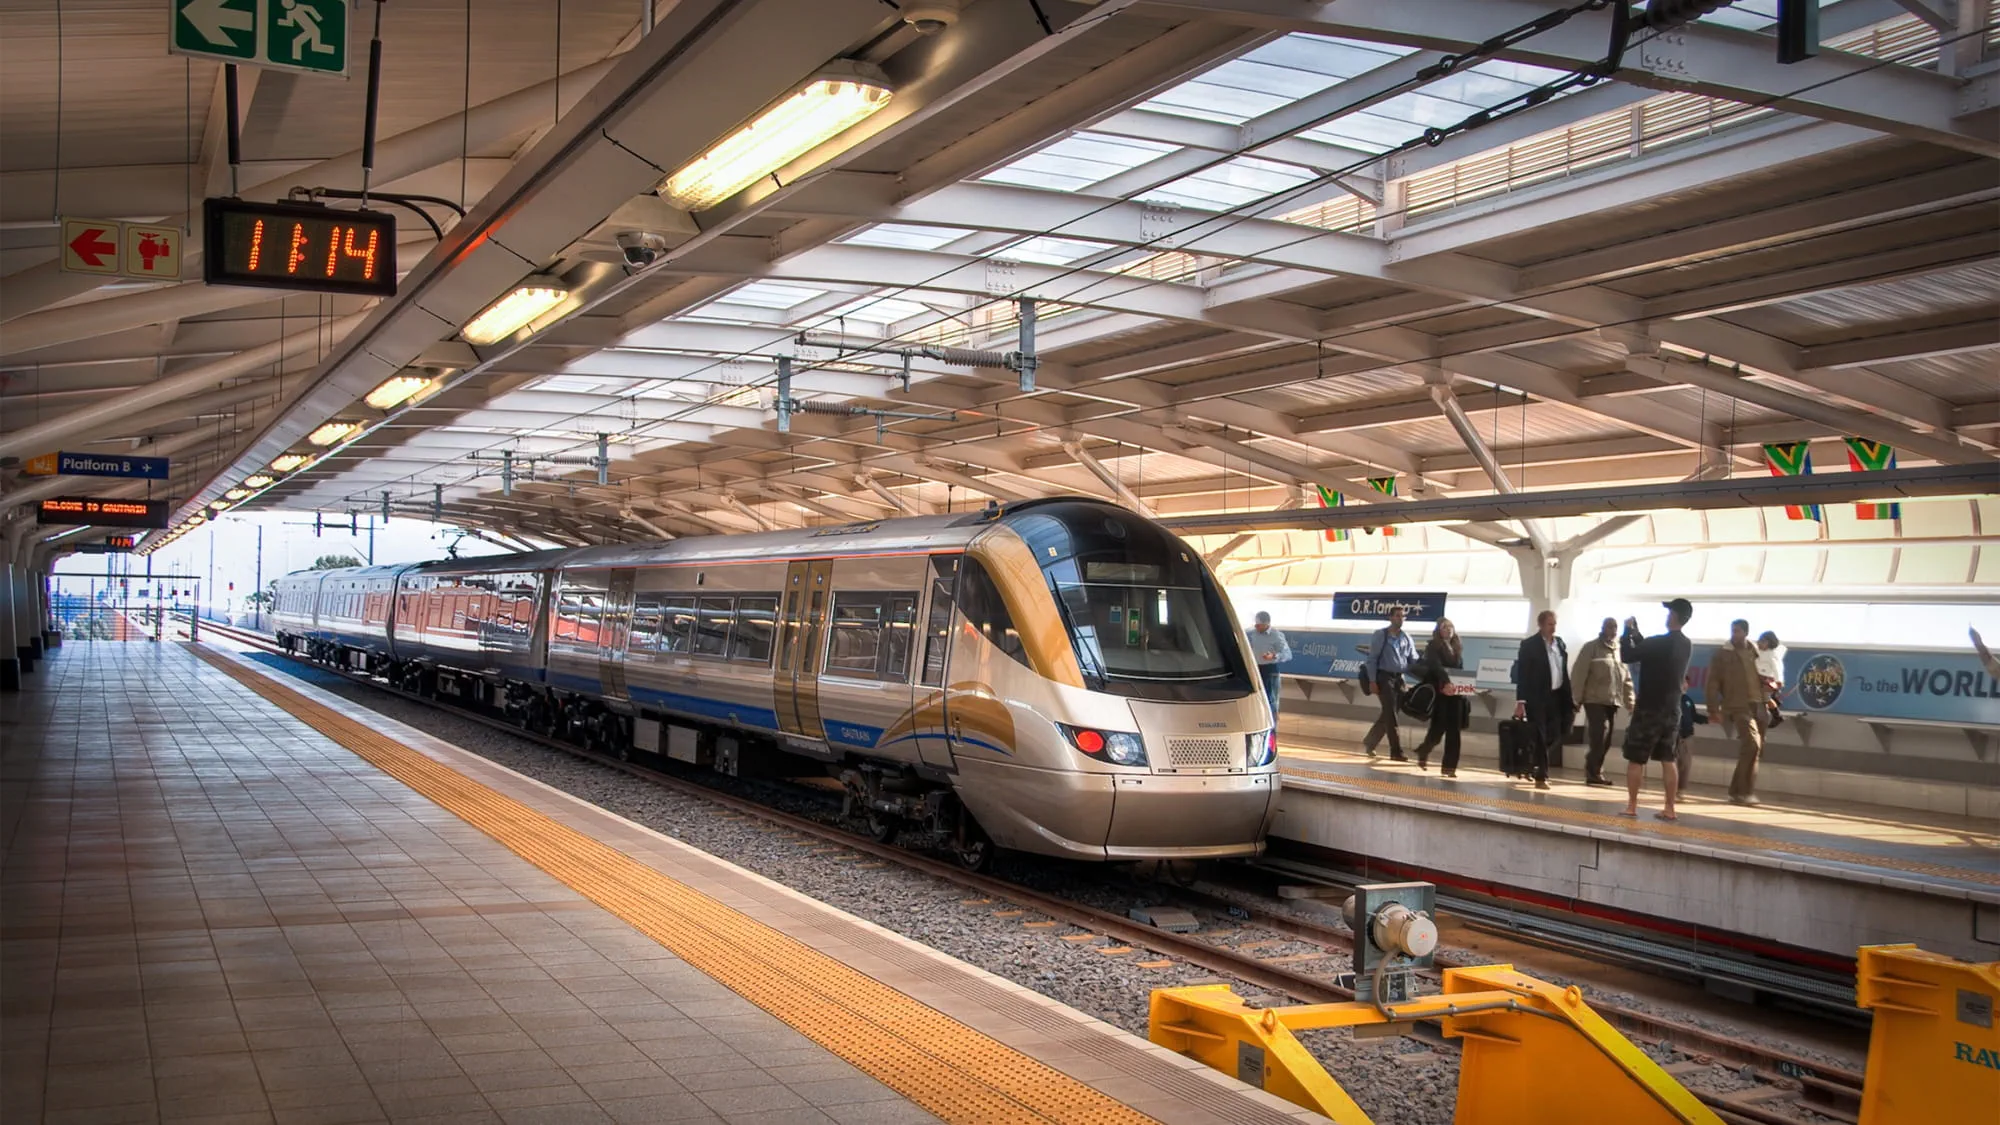 The Gautrain is the first high speed rail system in Africa.